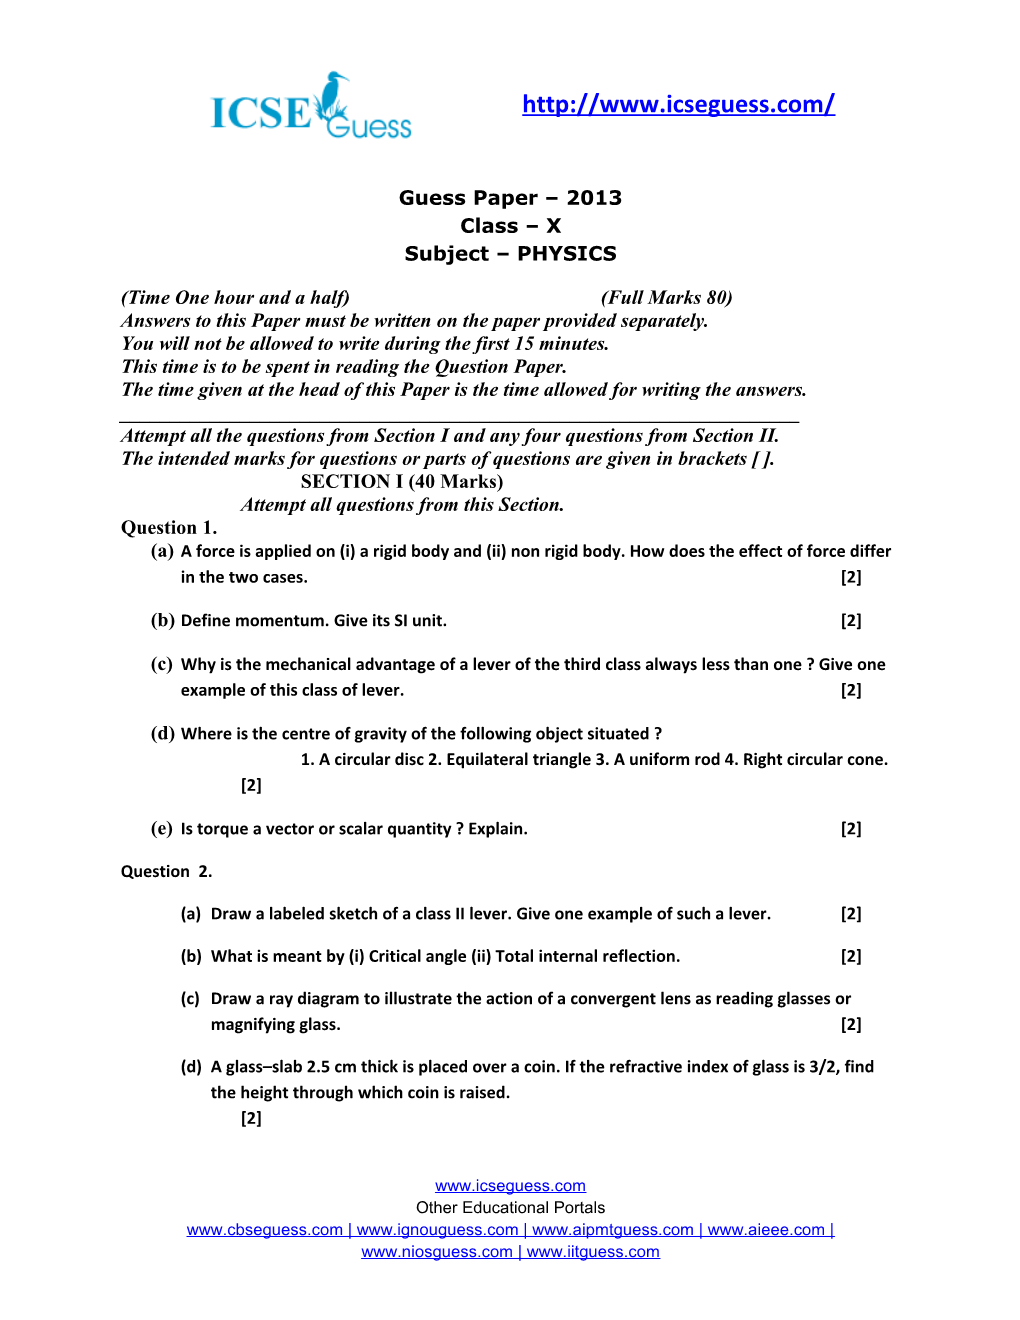 PHYSICS ICSE Class X Guess Paper for 2013